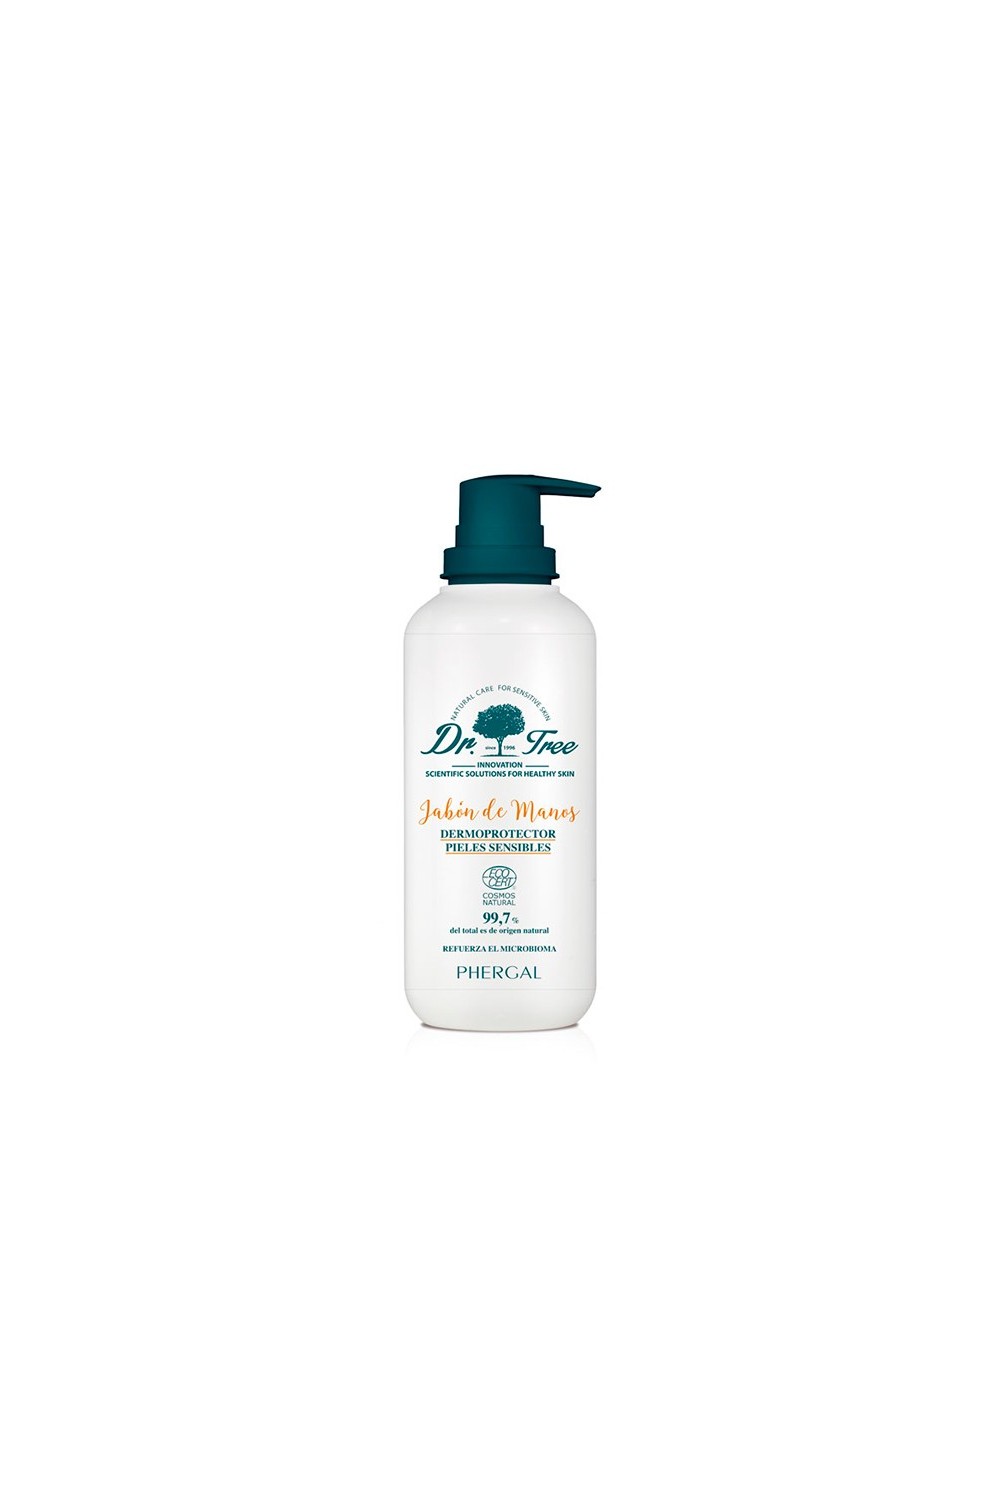 Dr. Tree Eco Hand Soap for Sensitive Skin 400ml